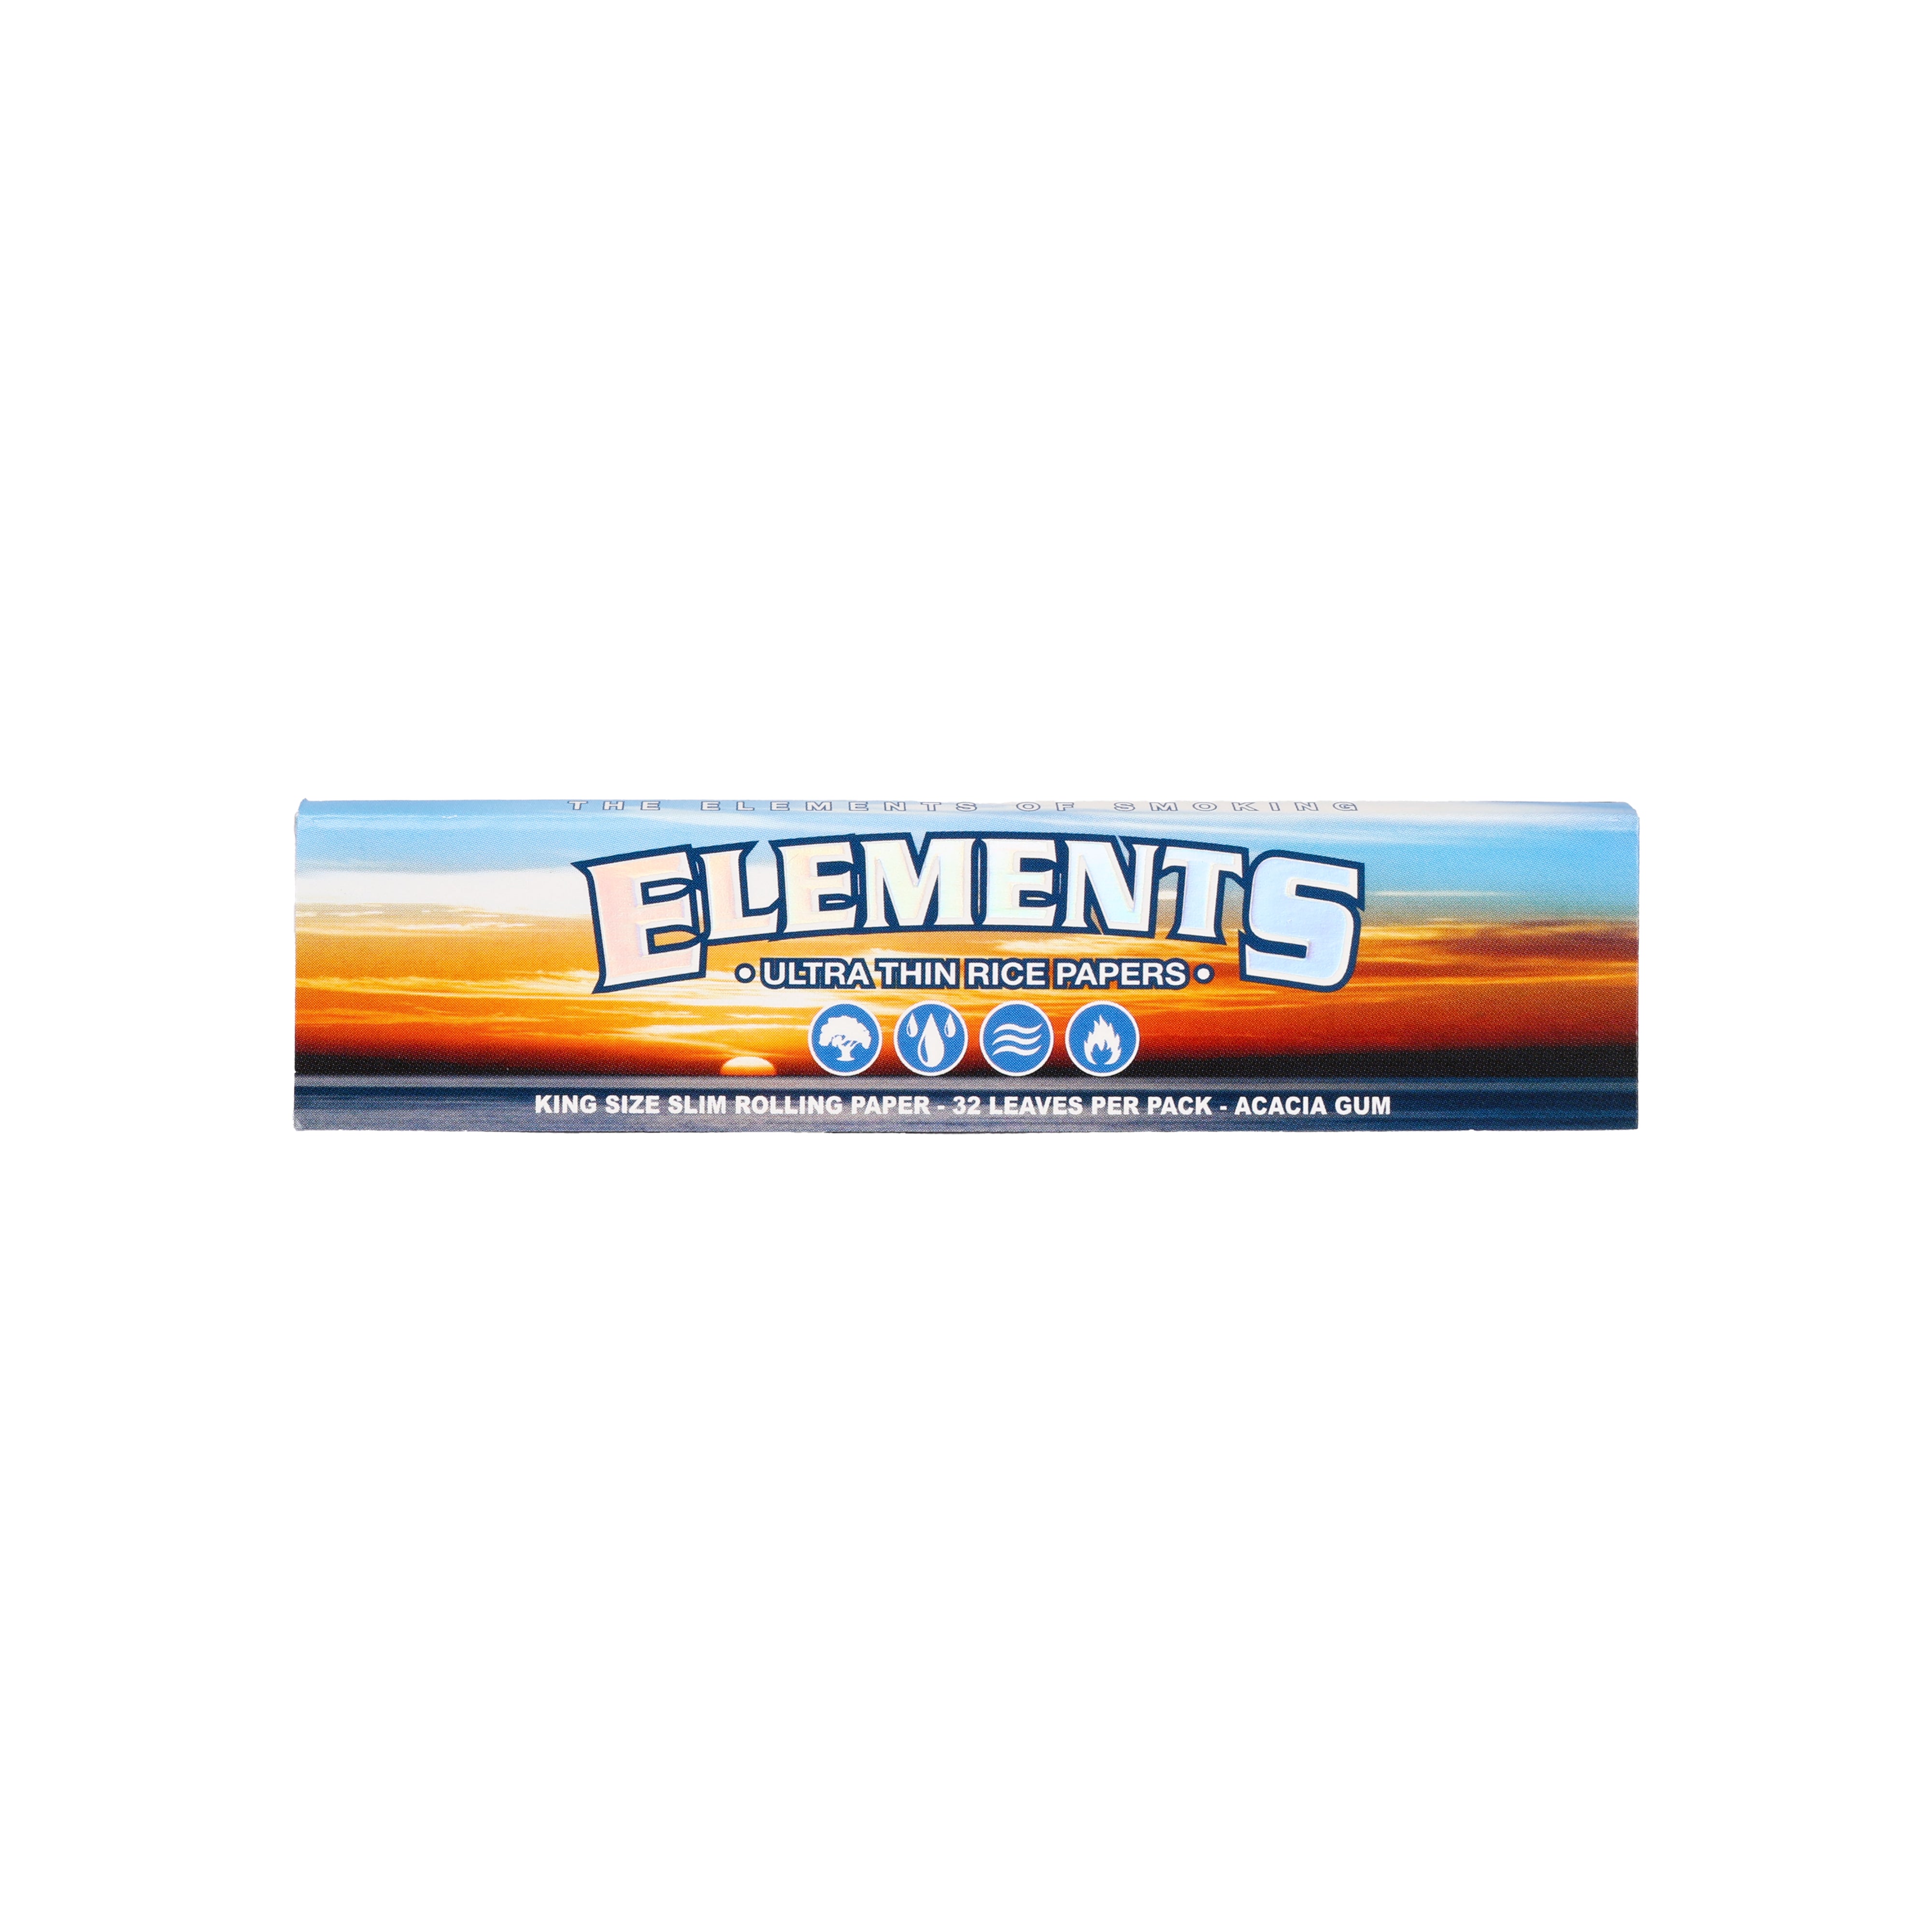 Elements rolling paper, 1 pack, 32 leaves, King size